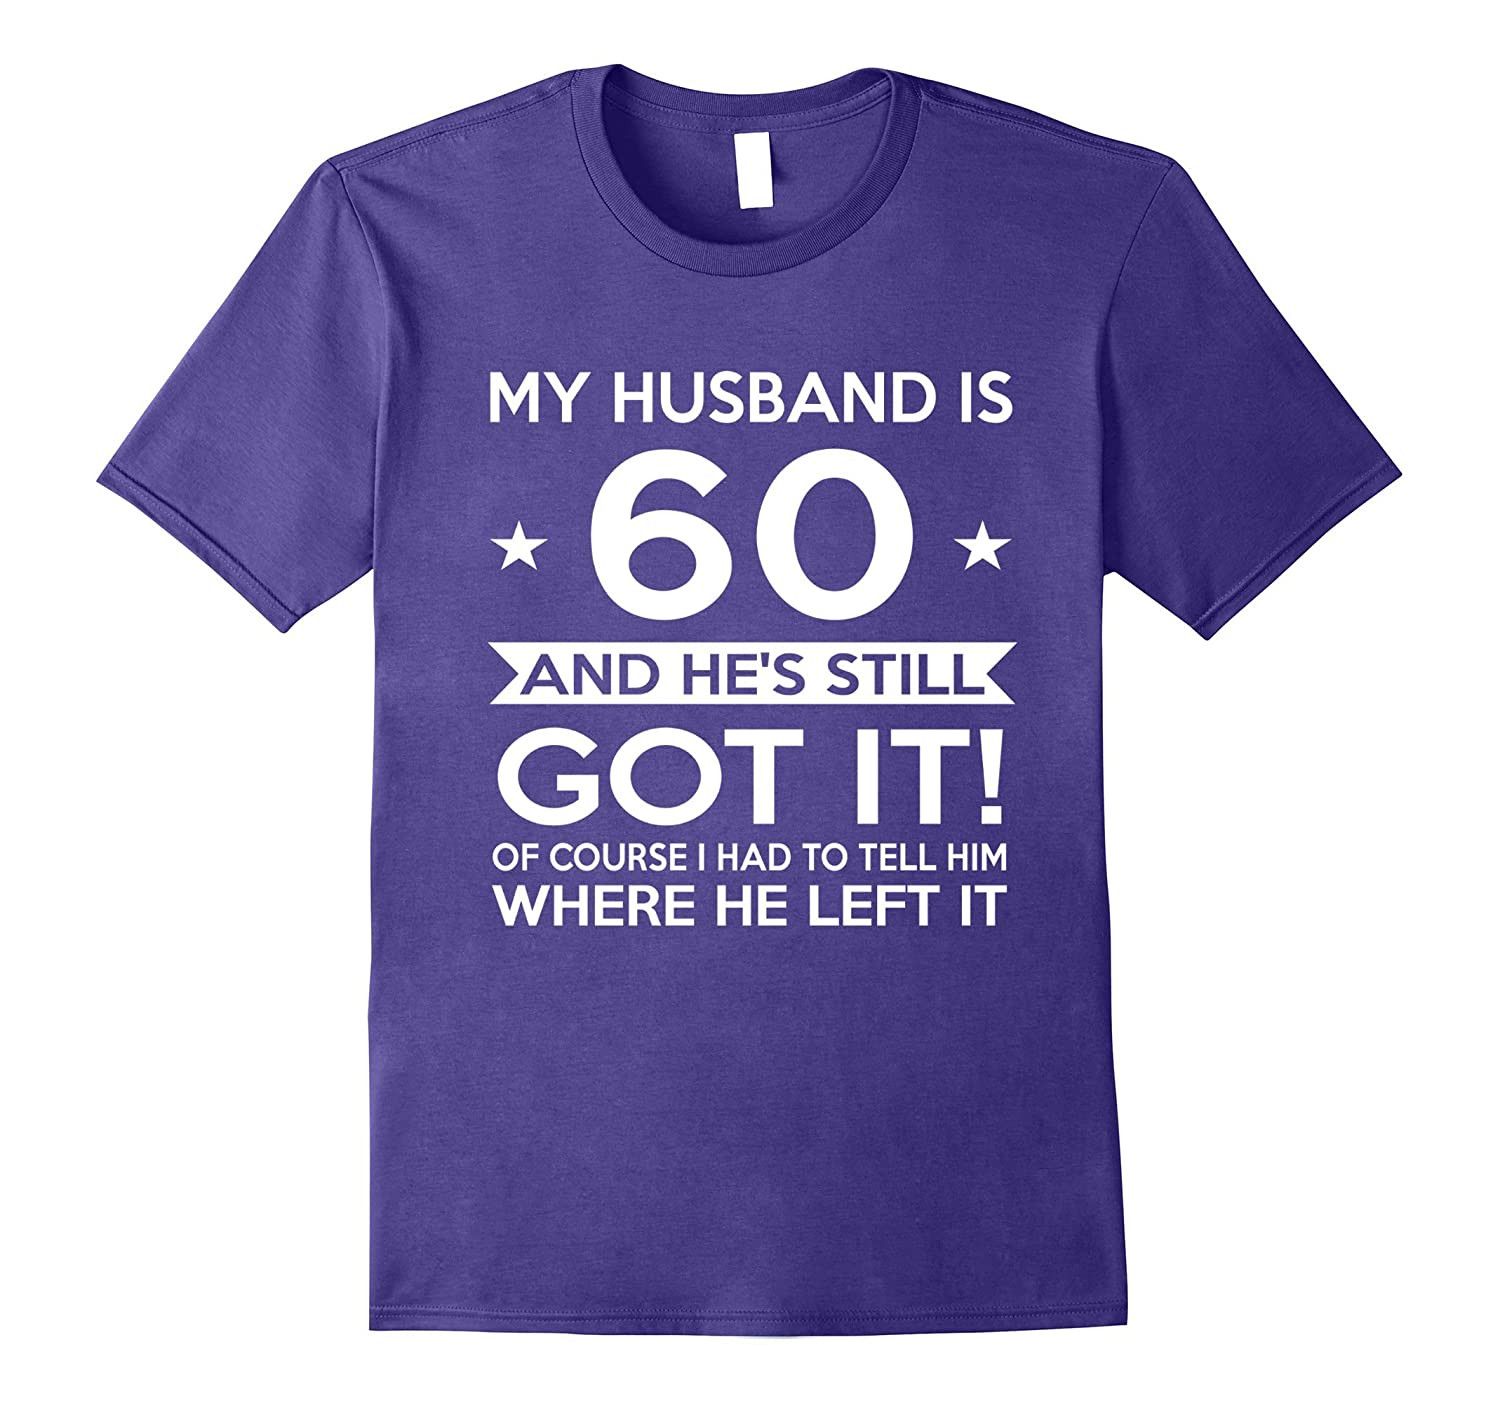 Gift Ideas For 60Th Birthday Man
 My Husband is 60 60th Birthday Gift Ideas for him CL